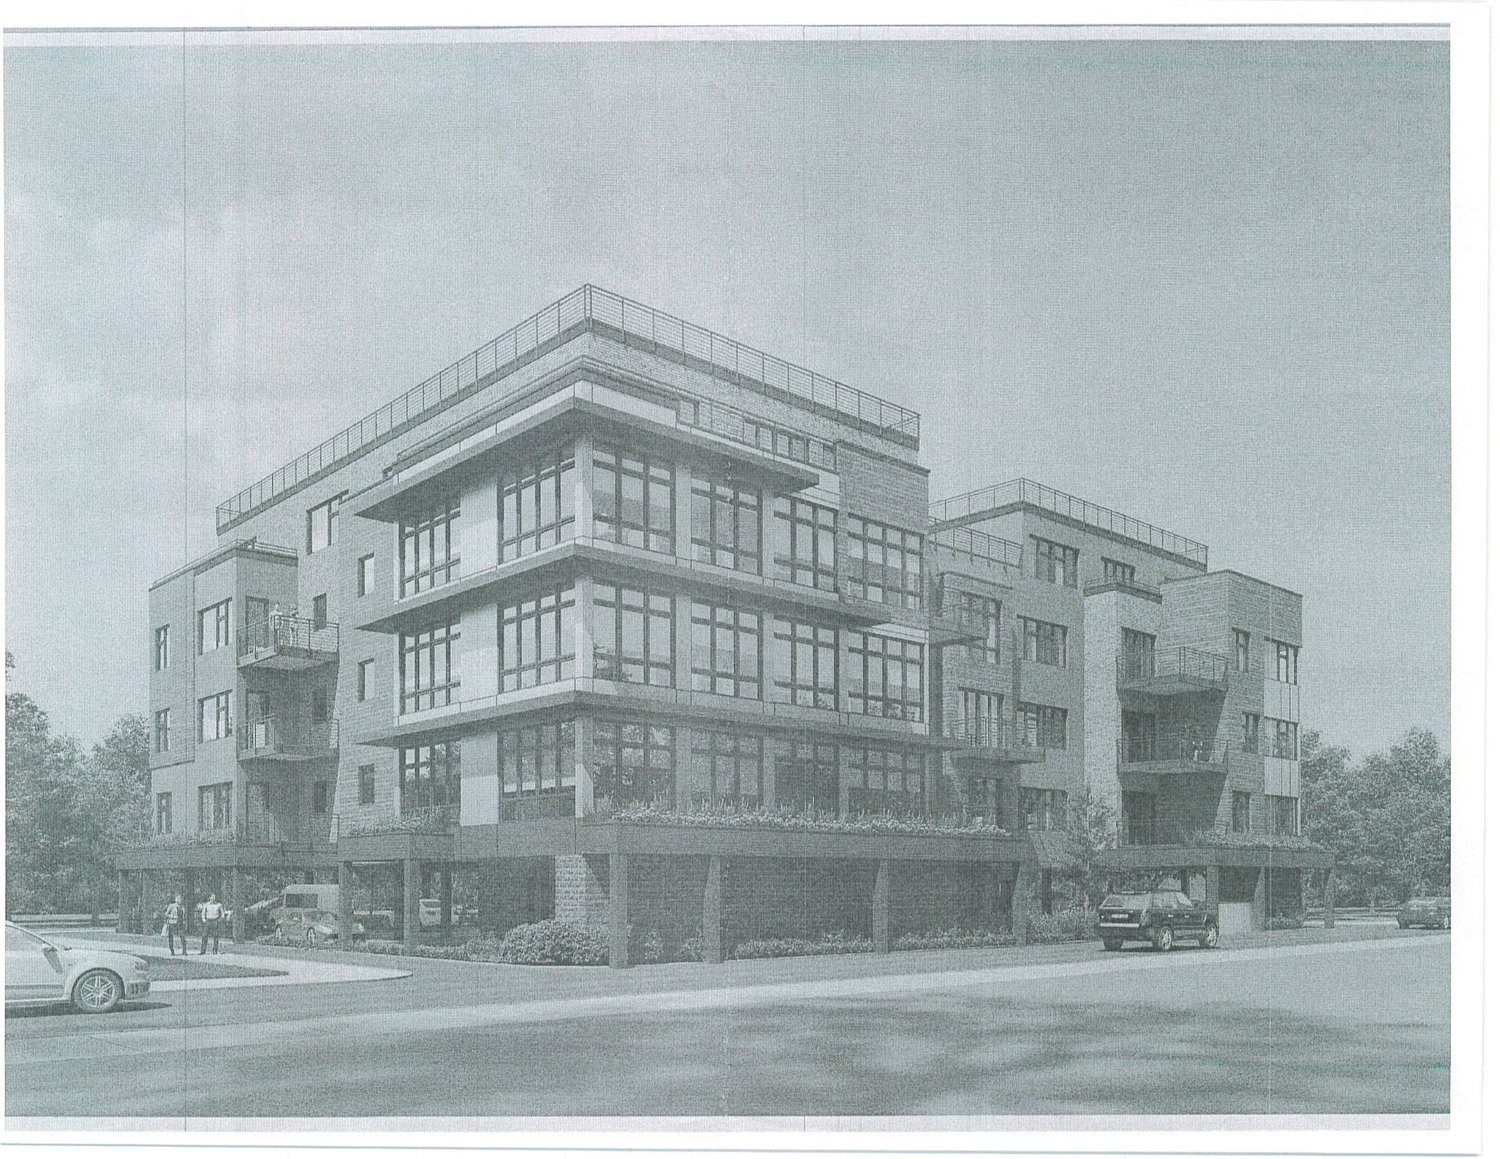 A mockup of the proposed apartment complex